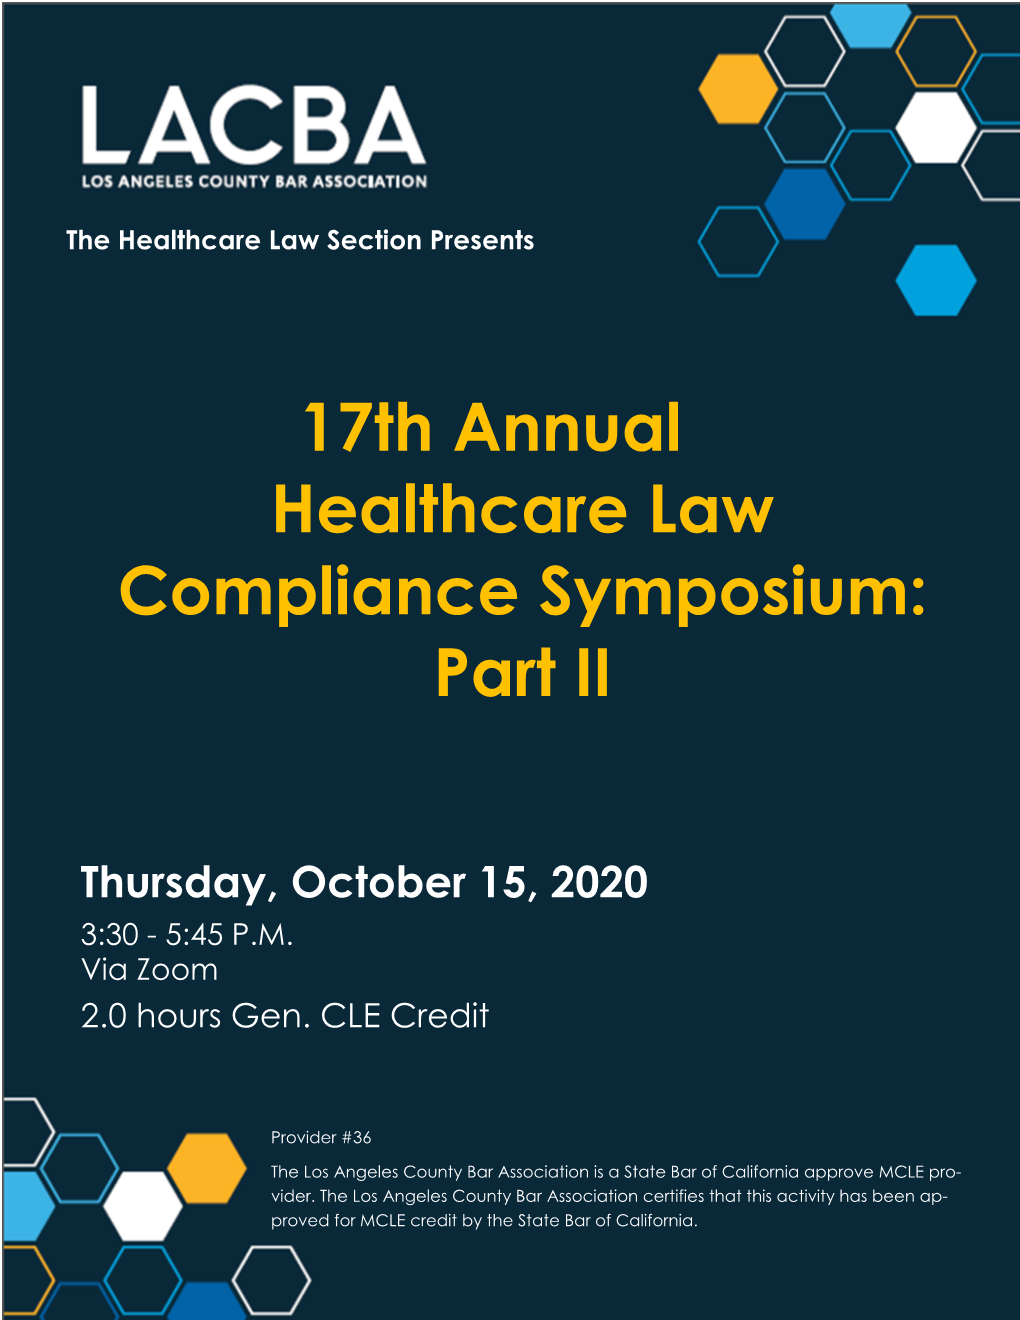 17Th Annual Healthcare Law Compliance Symposium: Part II